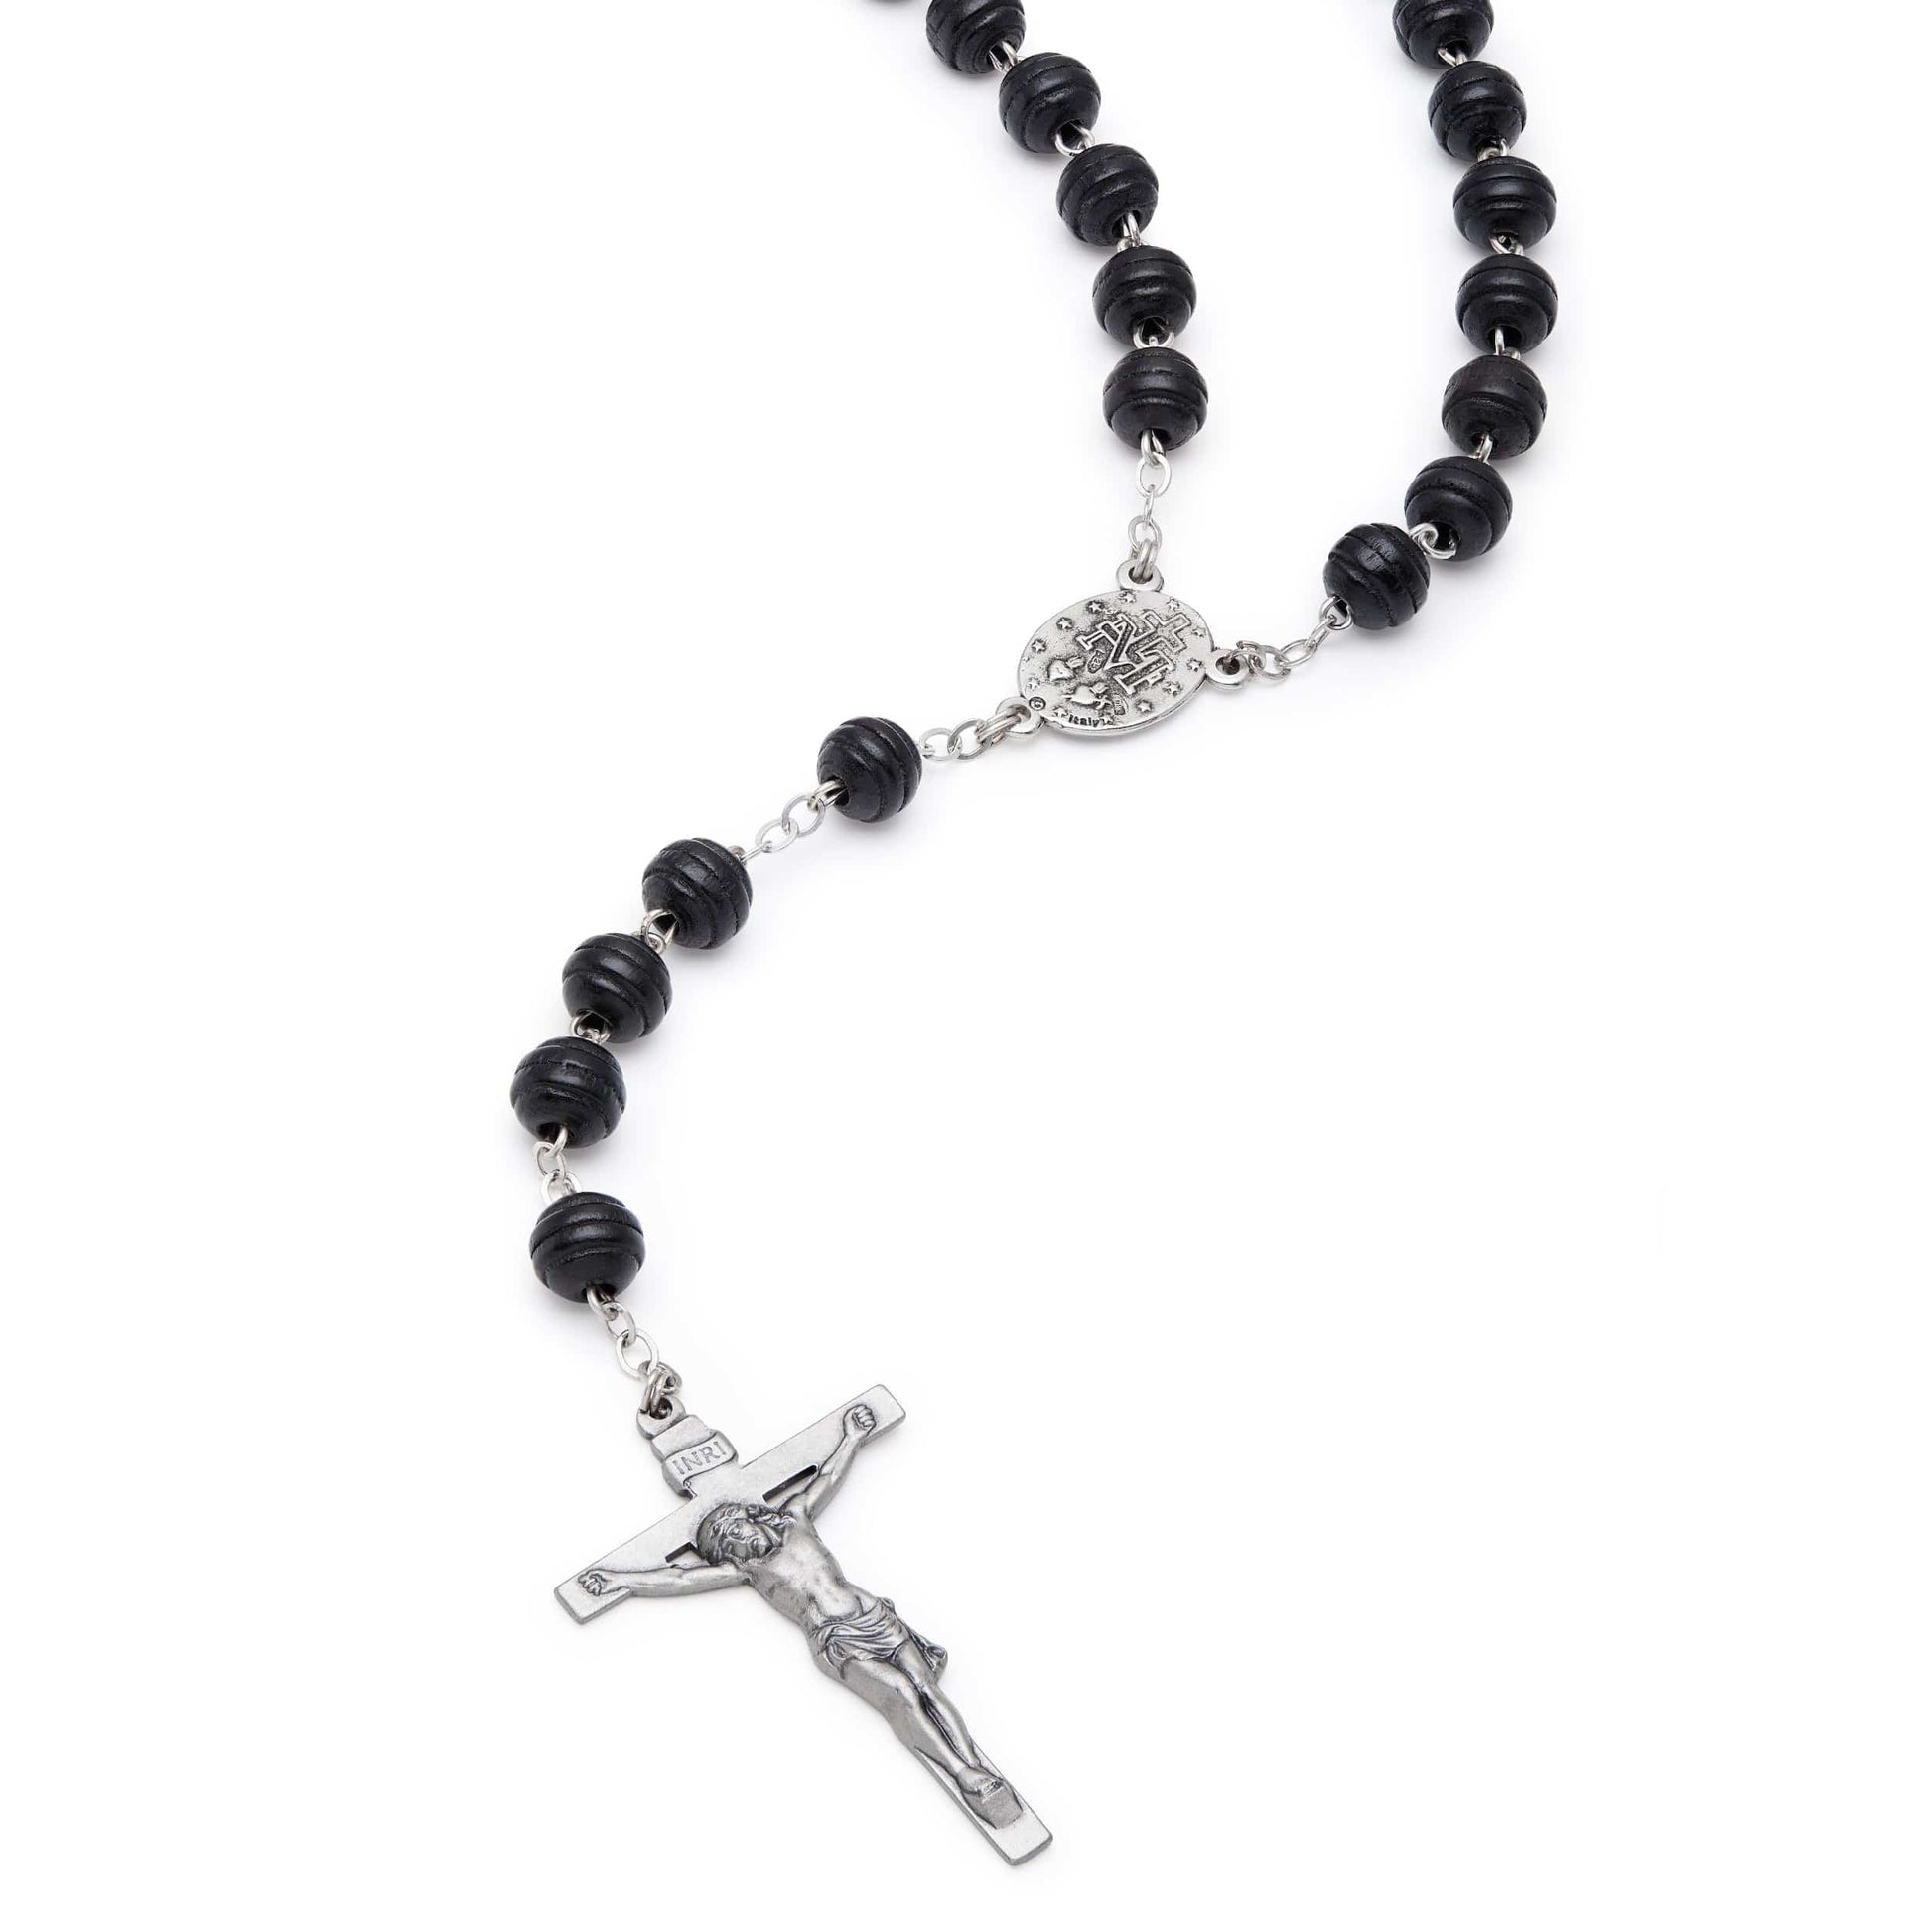 MONDO CATTOLICO Prayer Beads 46.5 cm (18.3 in) / 8 mm (0.31 in) Silver rosary in black wood